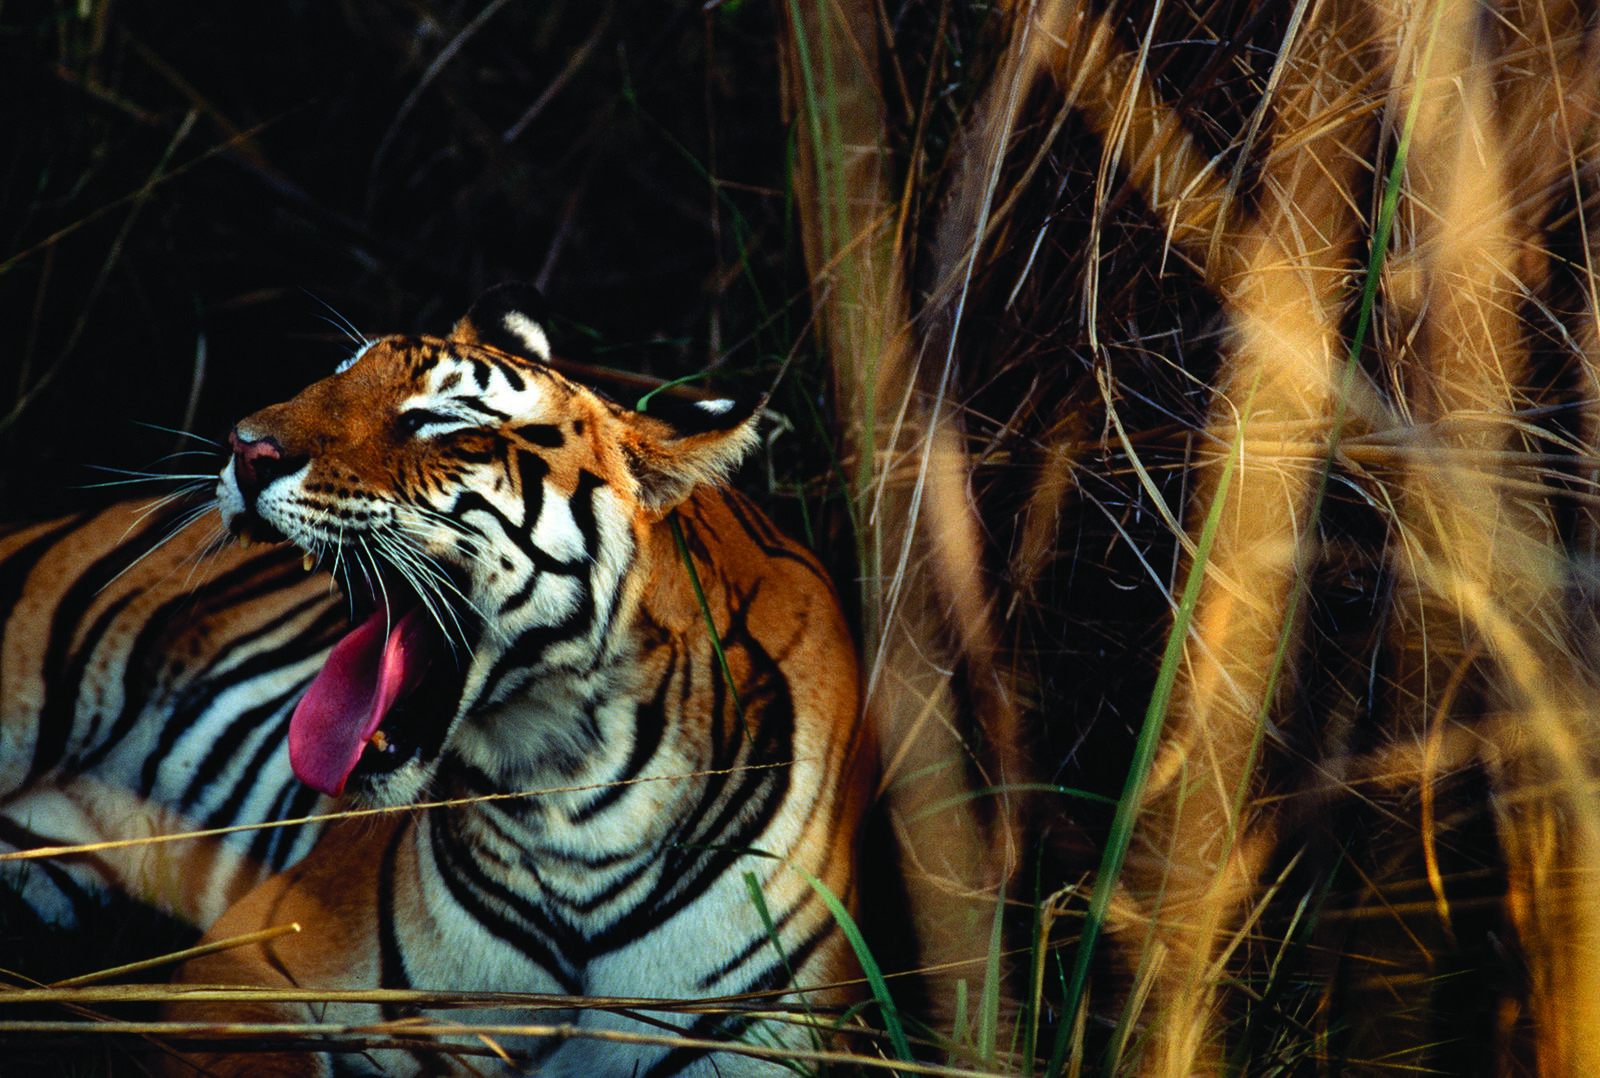 A Bengal tiger yawning and lounging in the tall grass